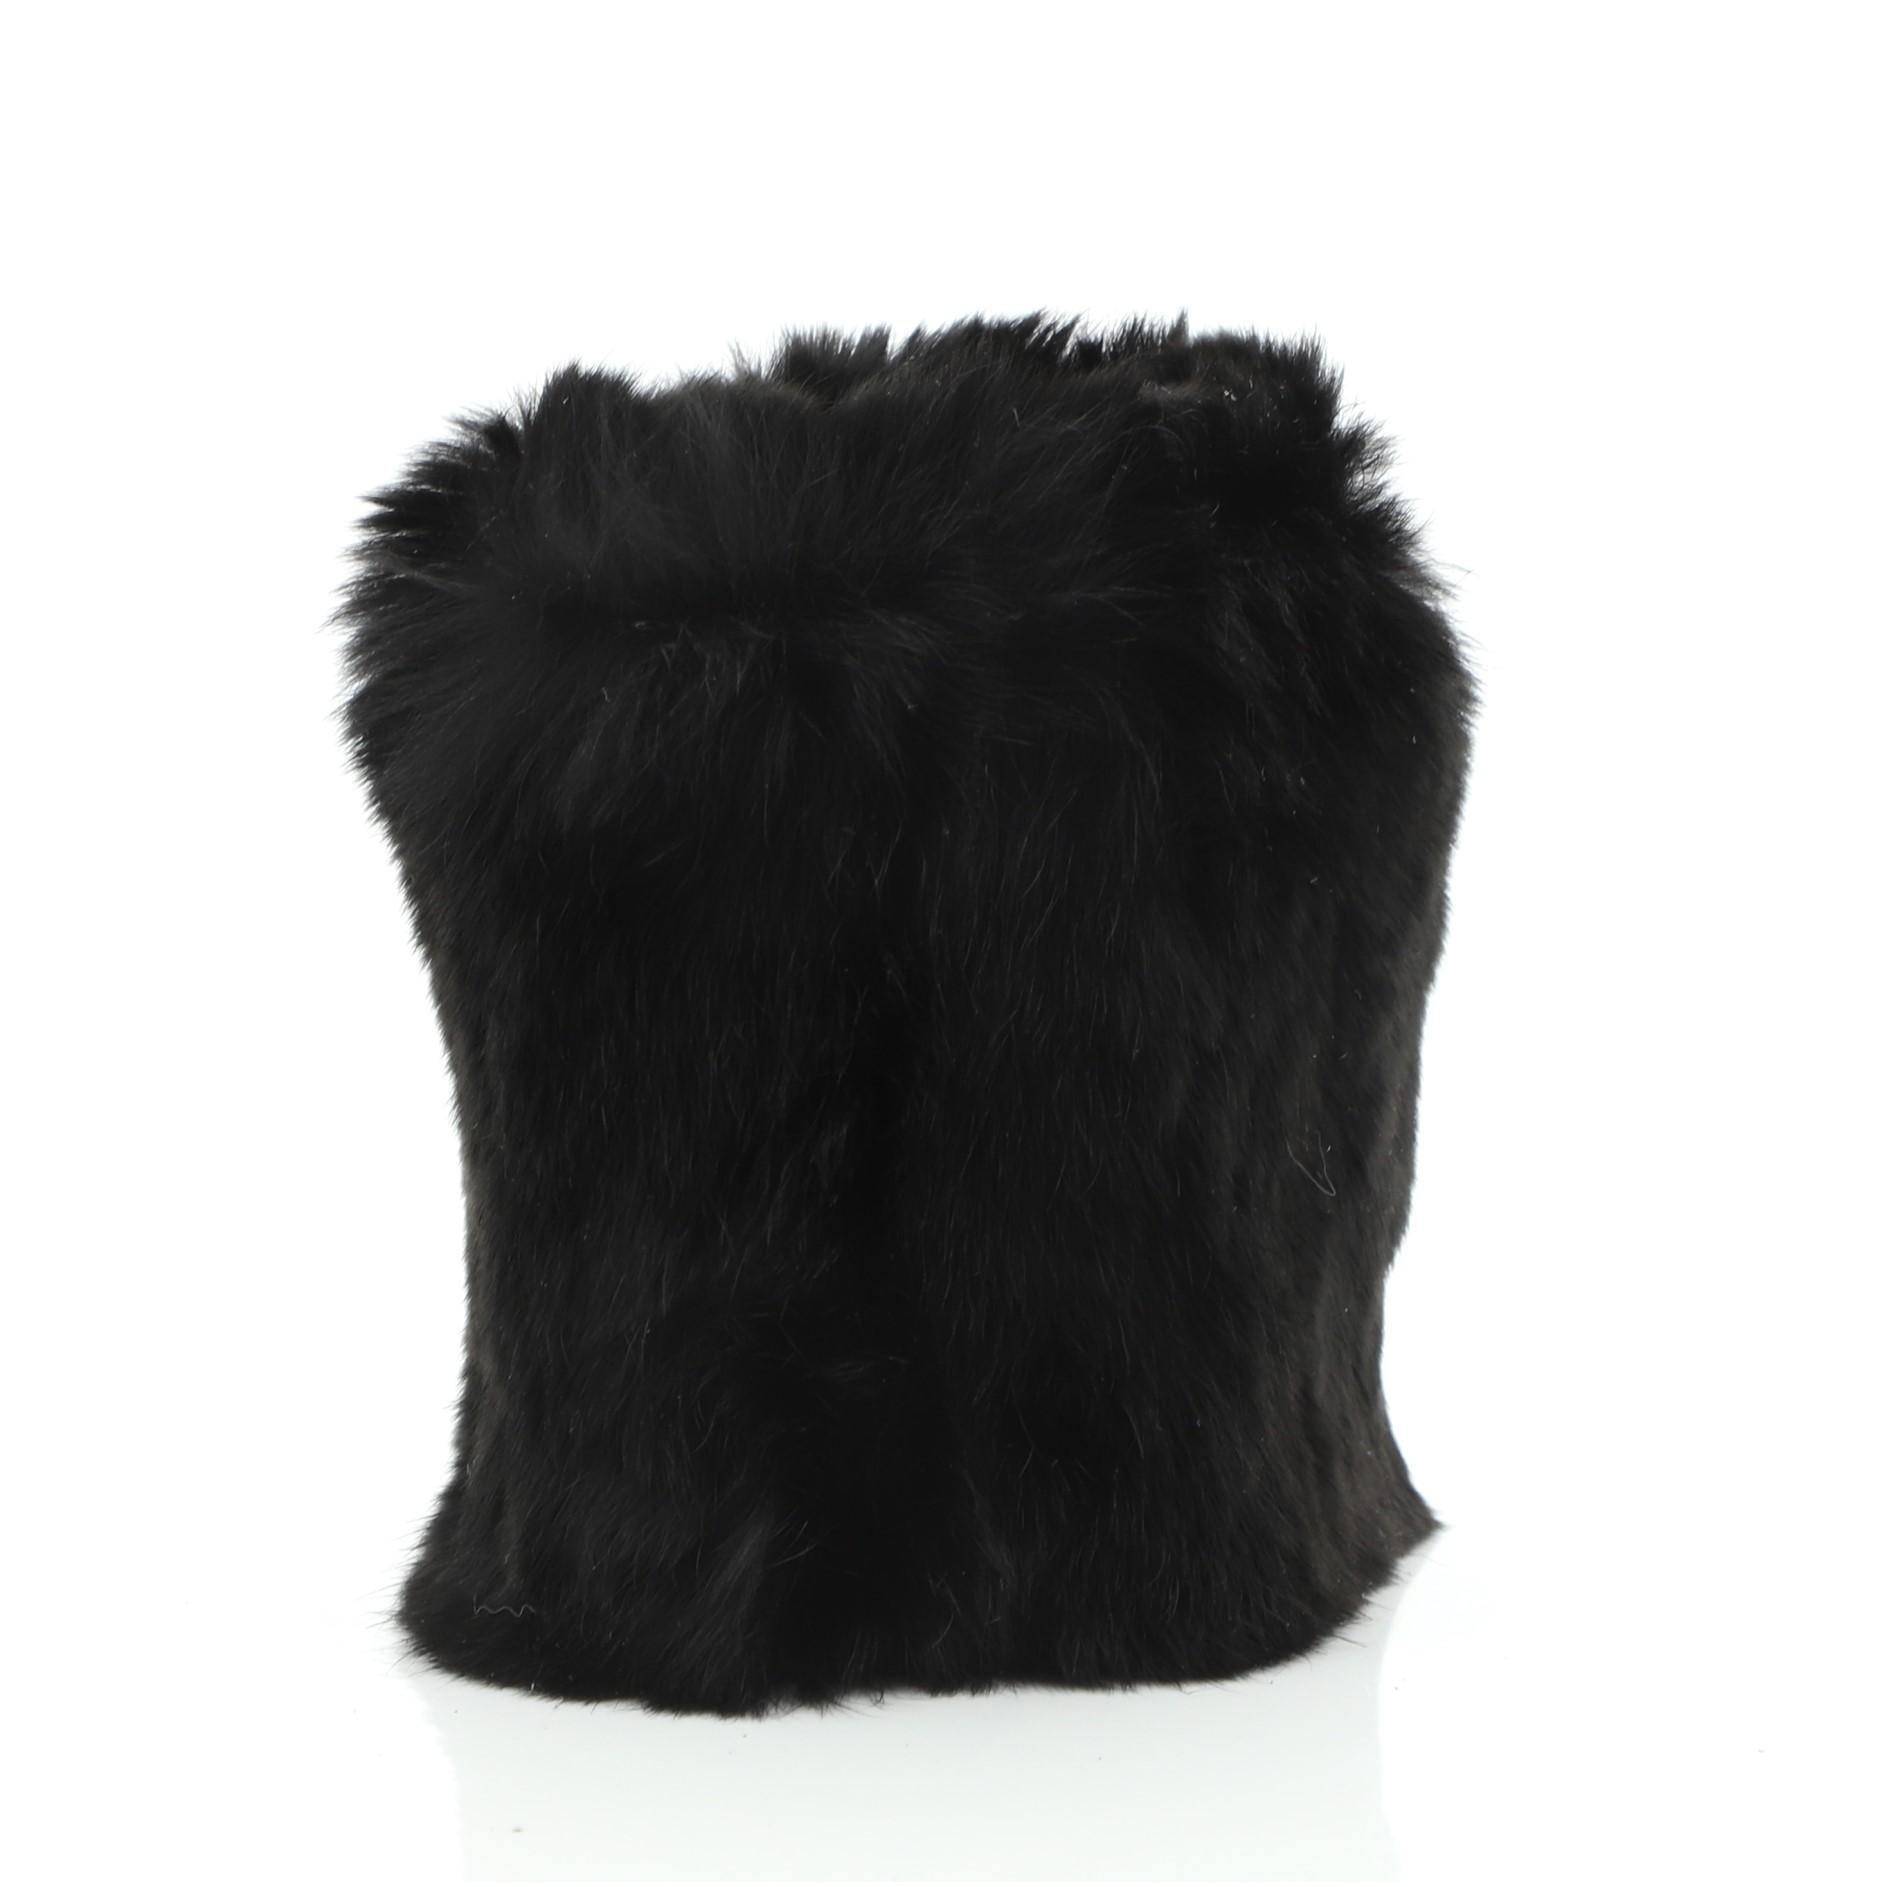 Chanel CC Wristband Lapin Fur
Black

Condition Details: Minor balding throughout.

50235MSC

Height 5